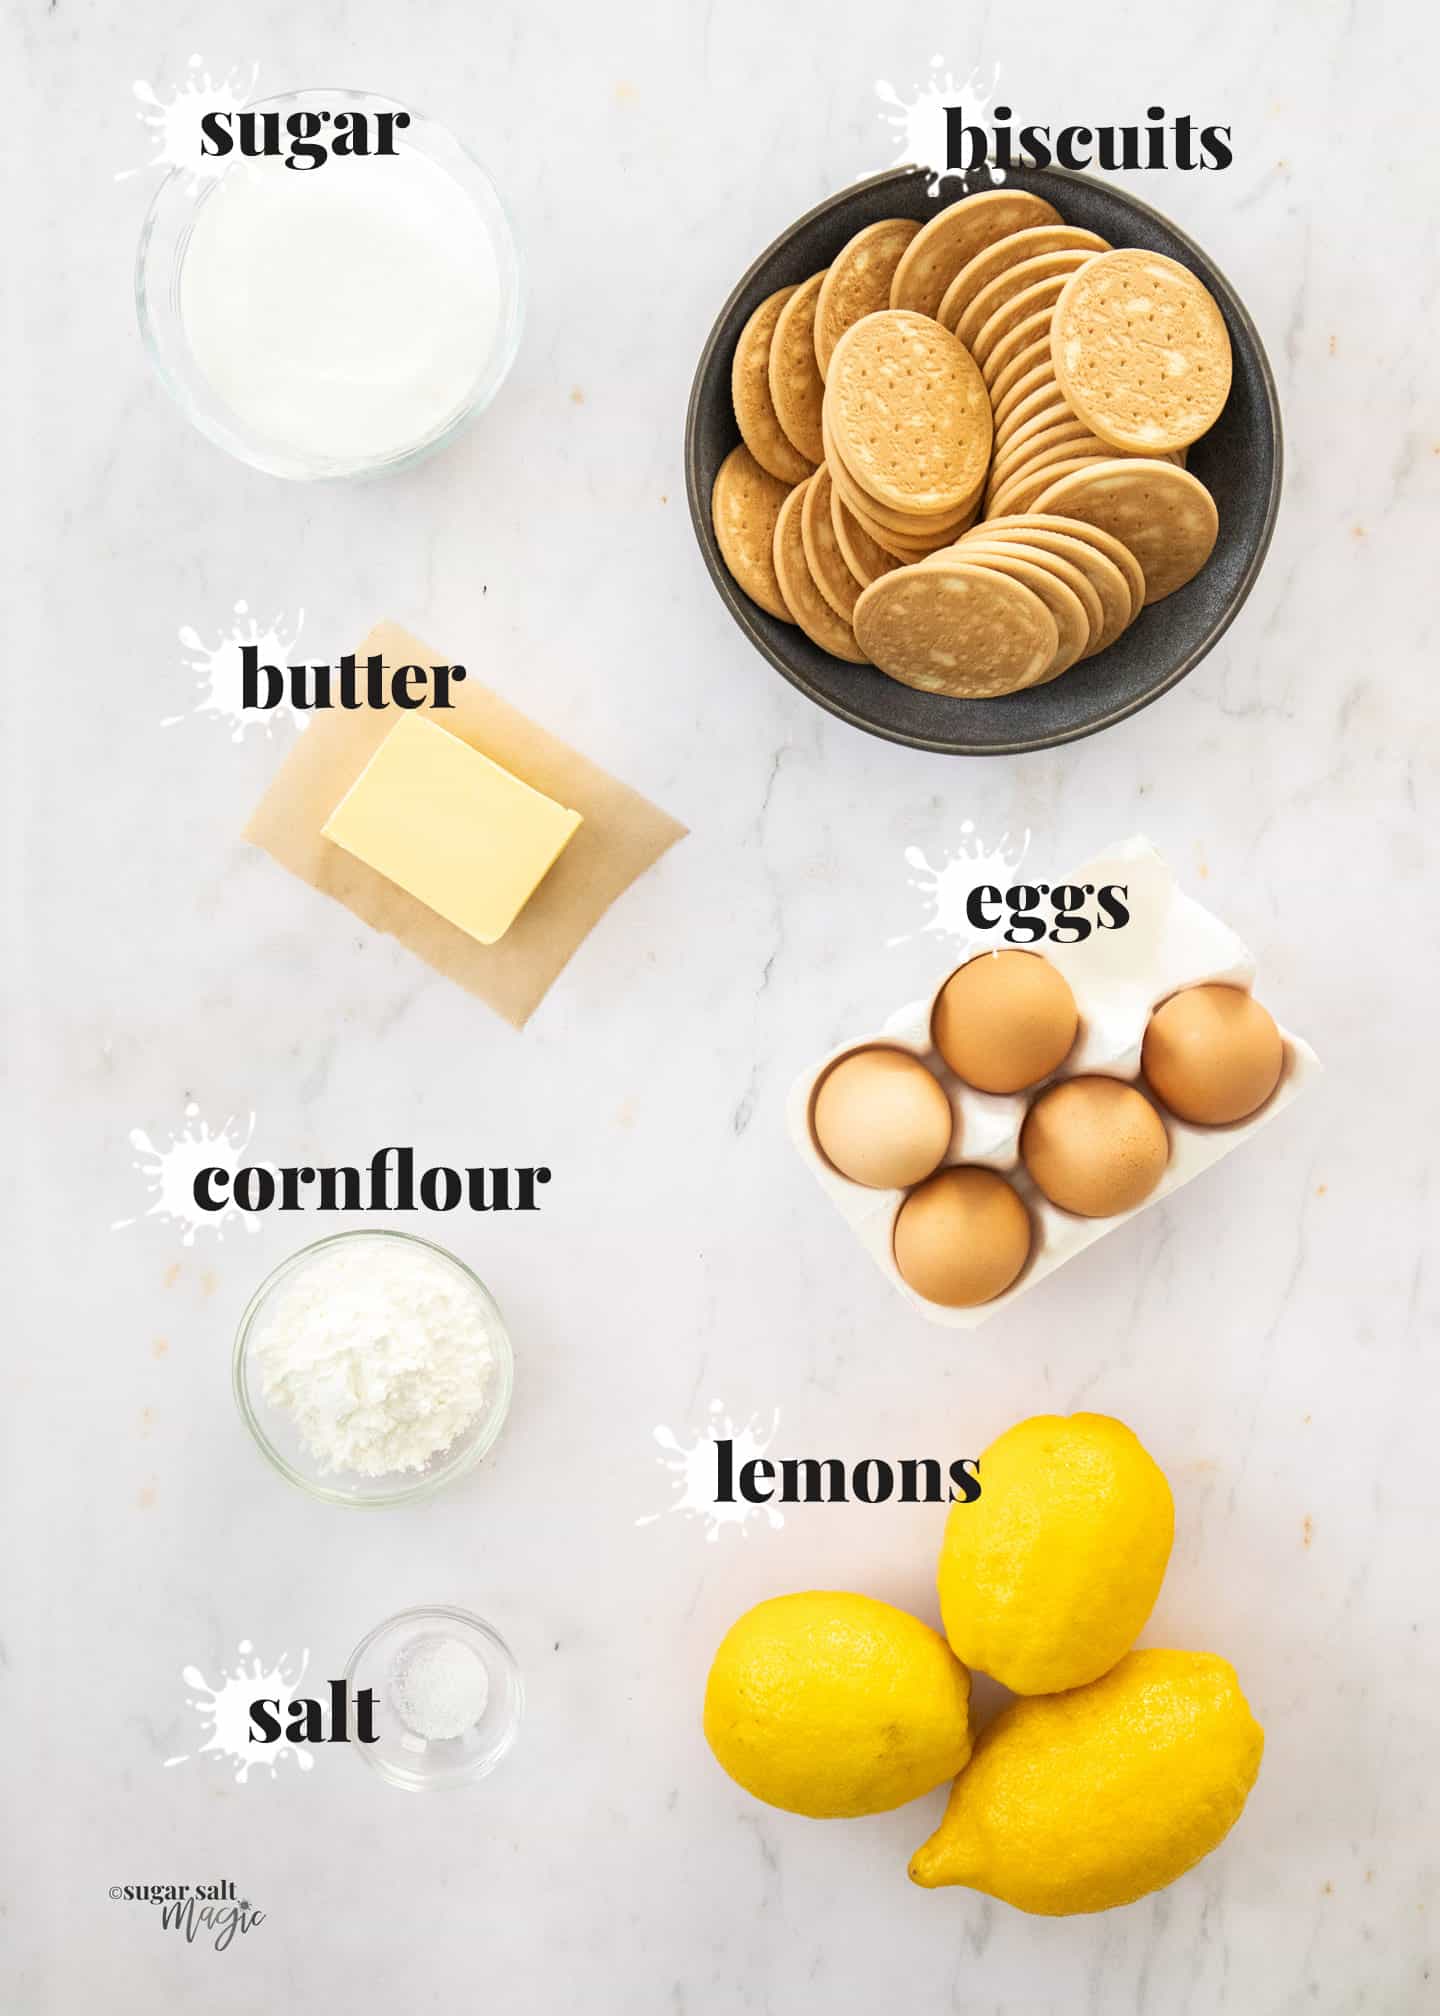 Ingredients for lemon meringue pie on a white marble surface.